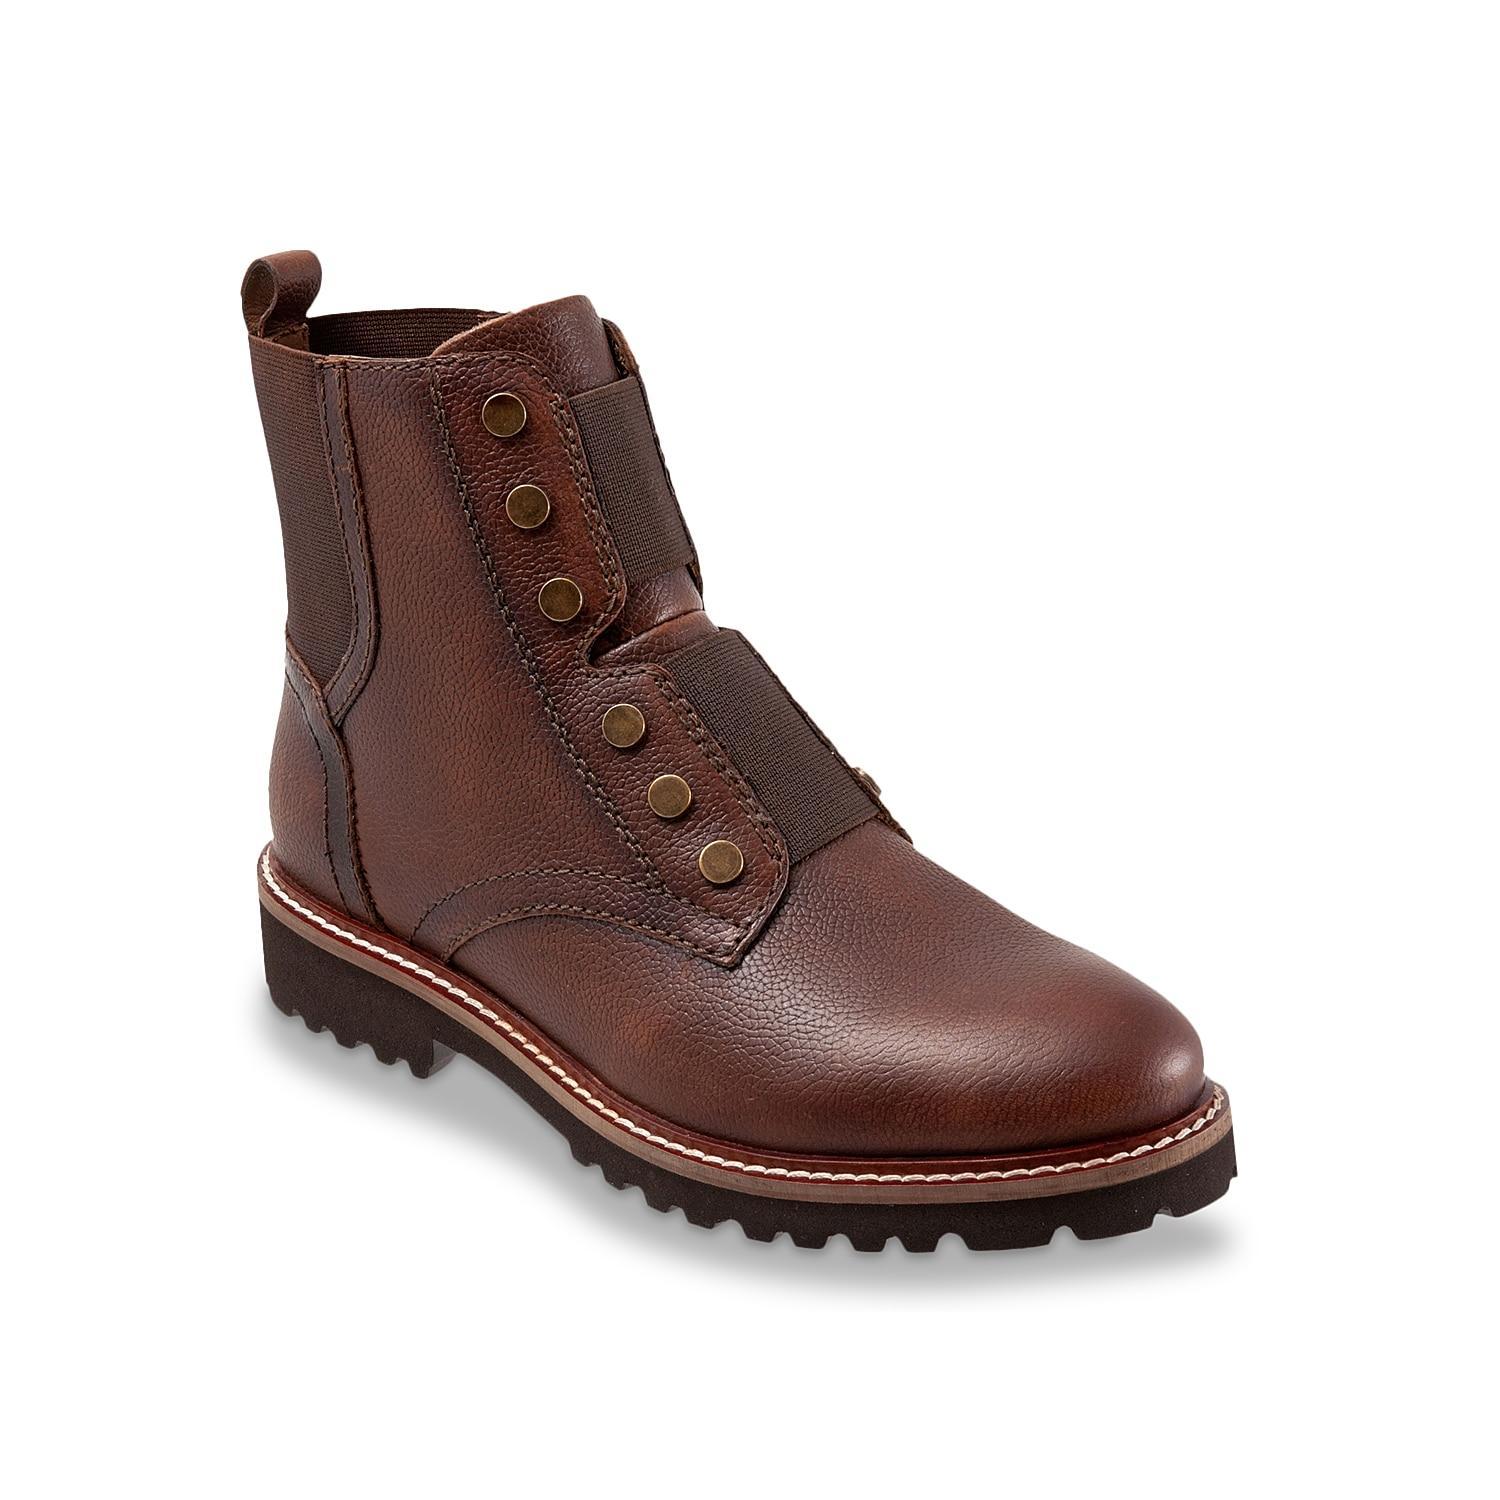 SoftWalk Indiana Chelsea Boot Product Image